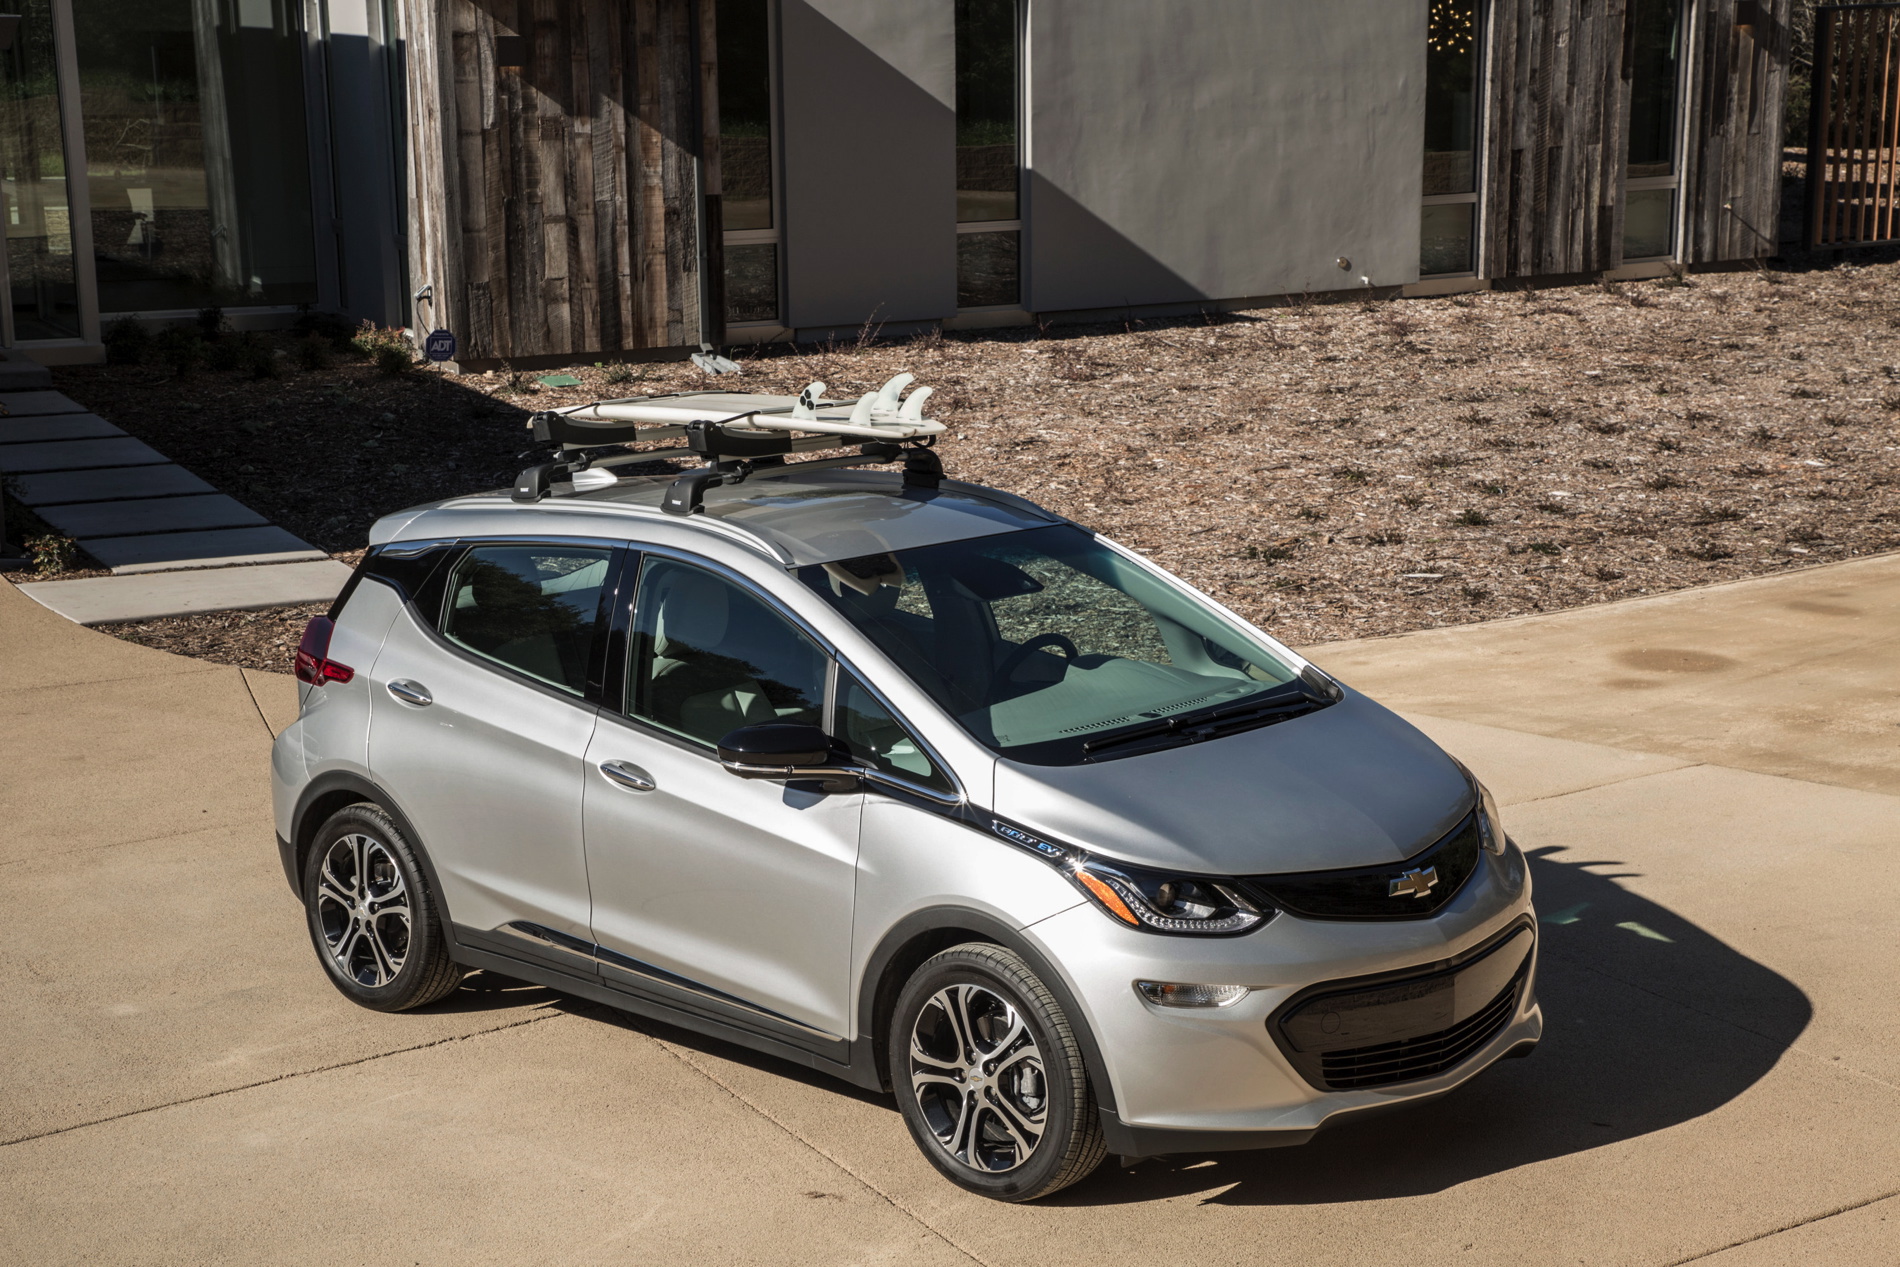 Chevy Bolt images 03